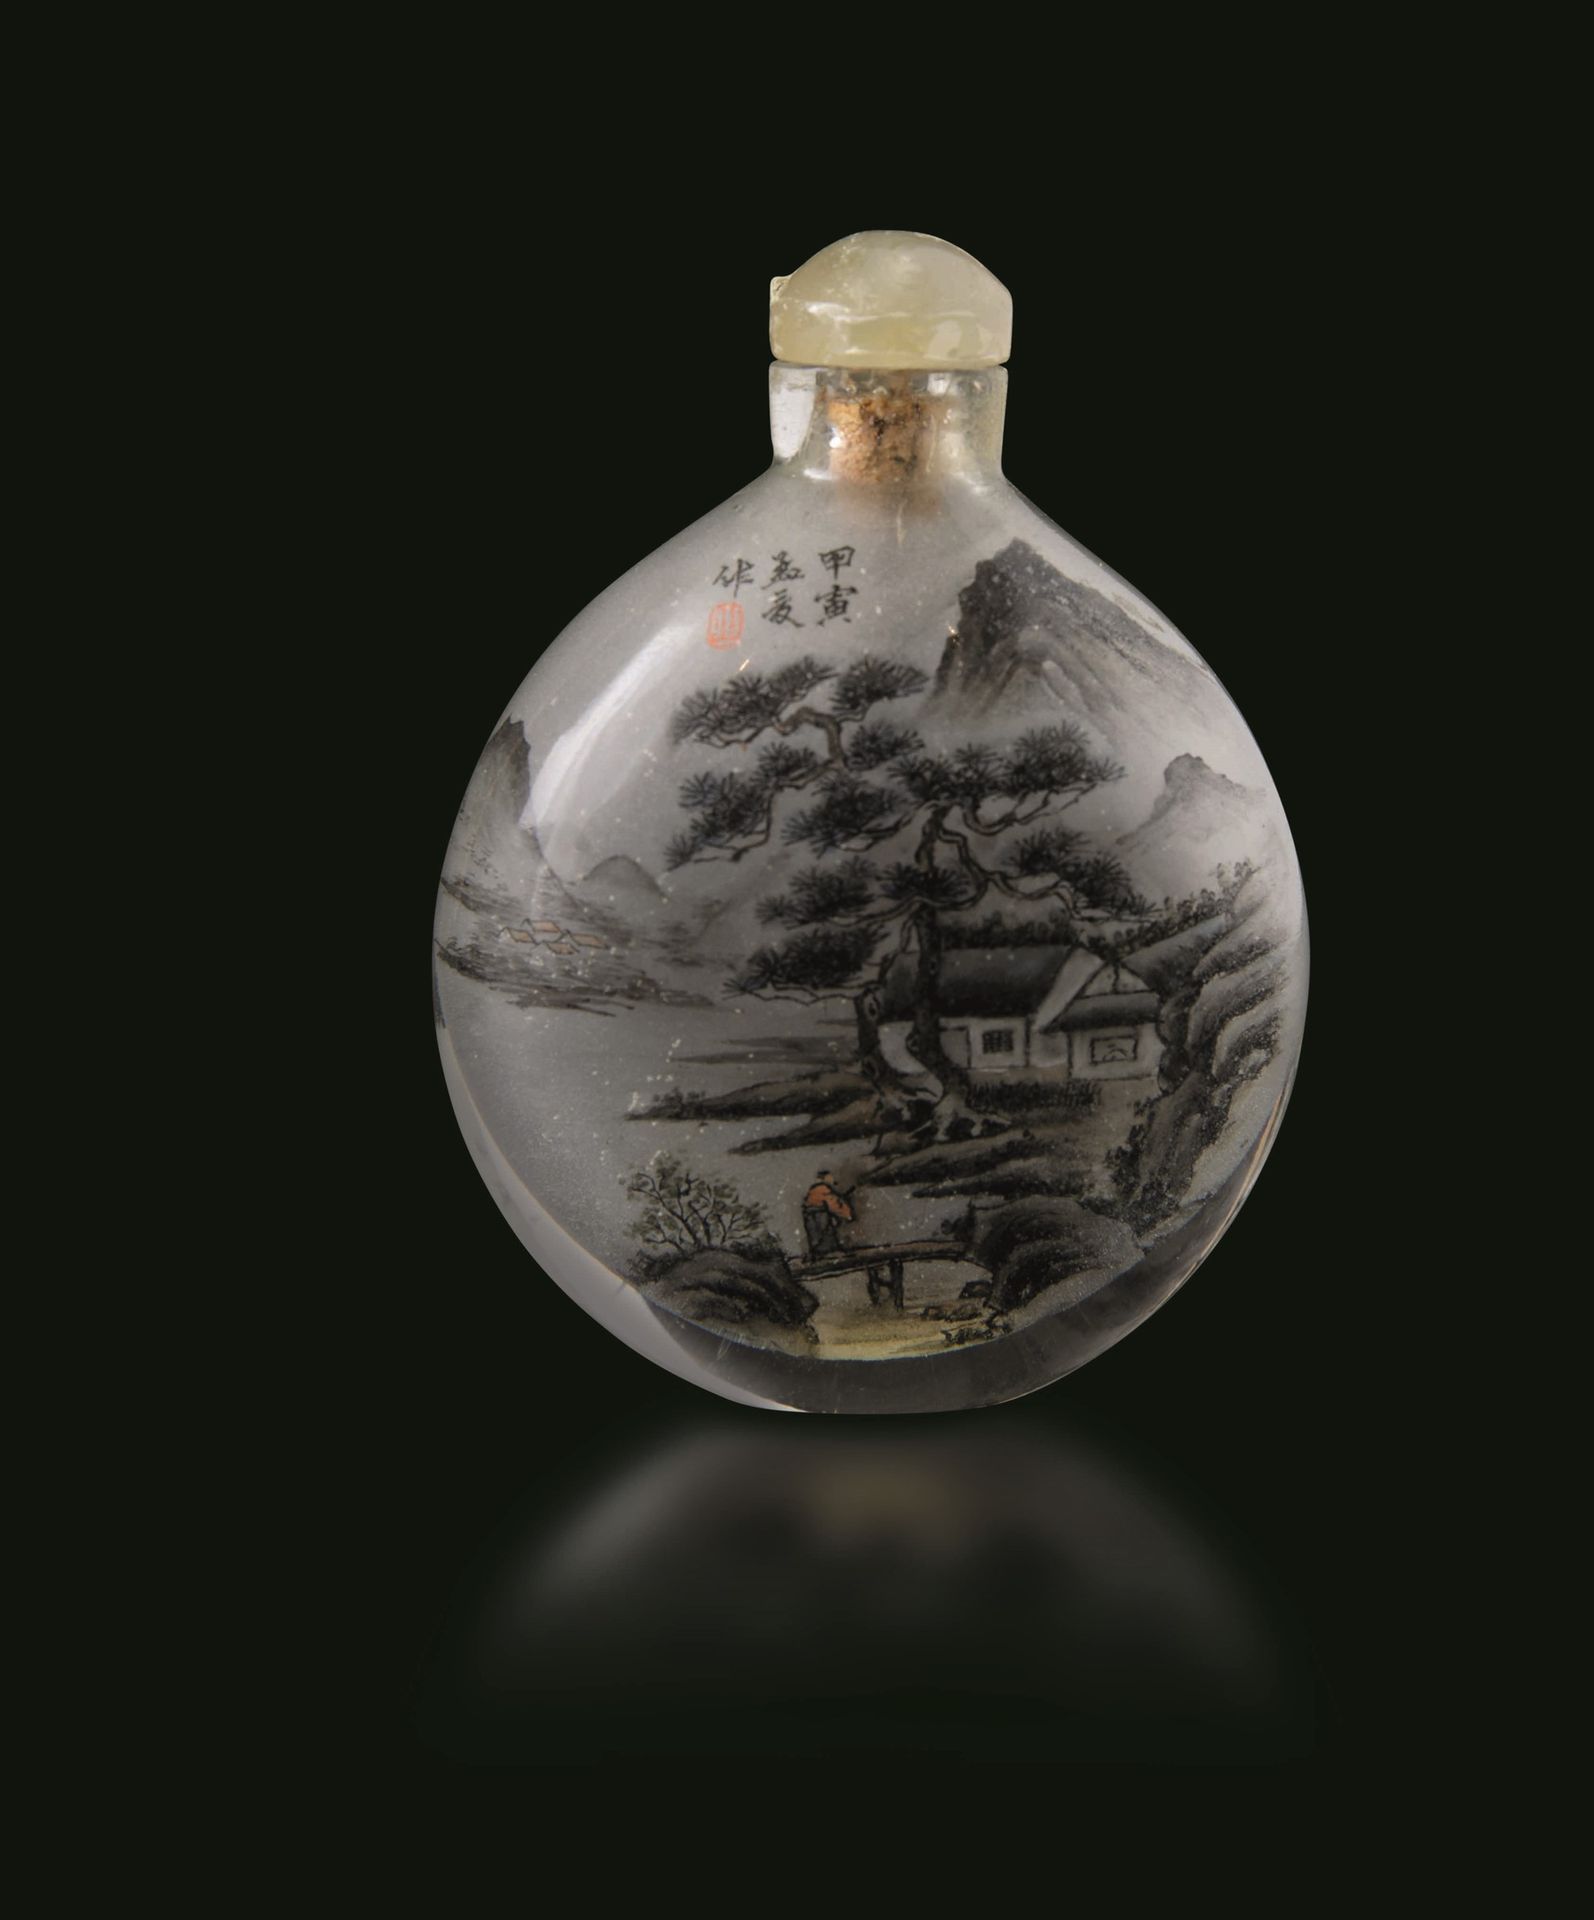 A glass snuff bottle, China, Qing Dynasty, 1800s H 7cm